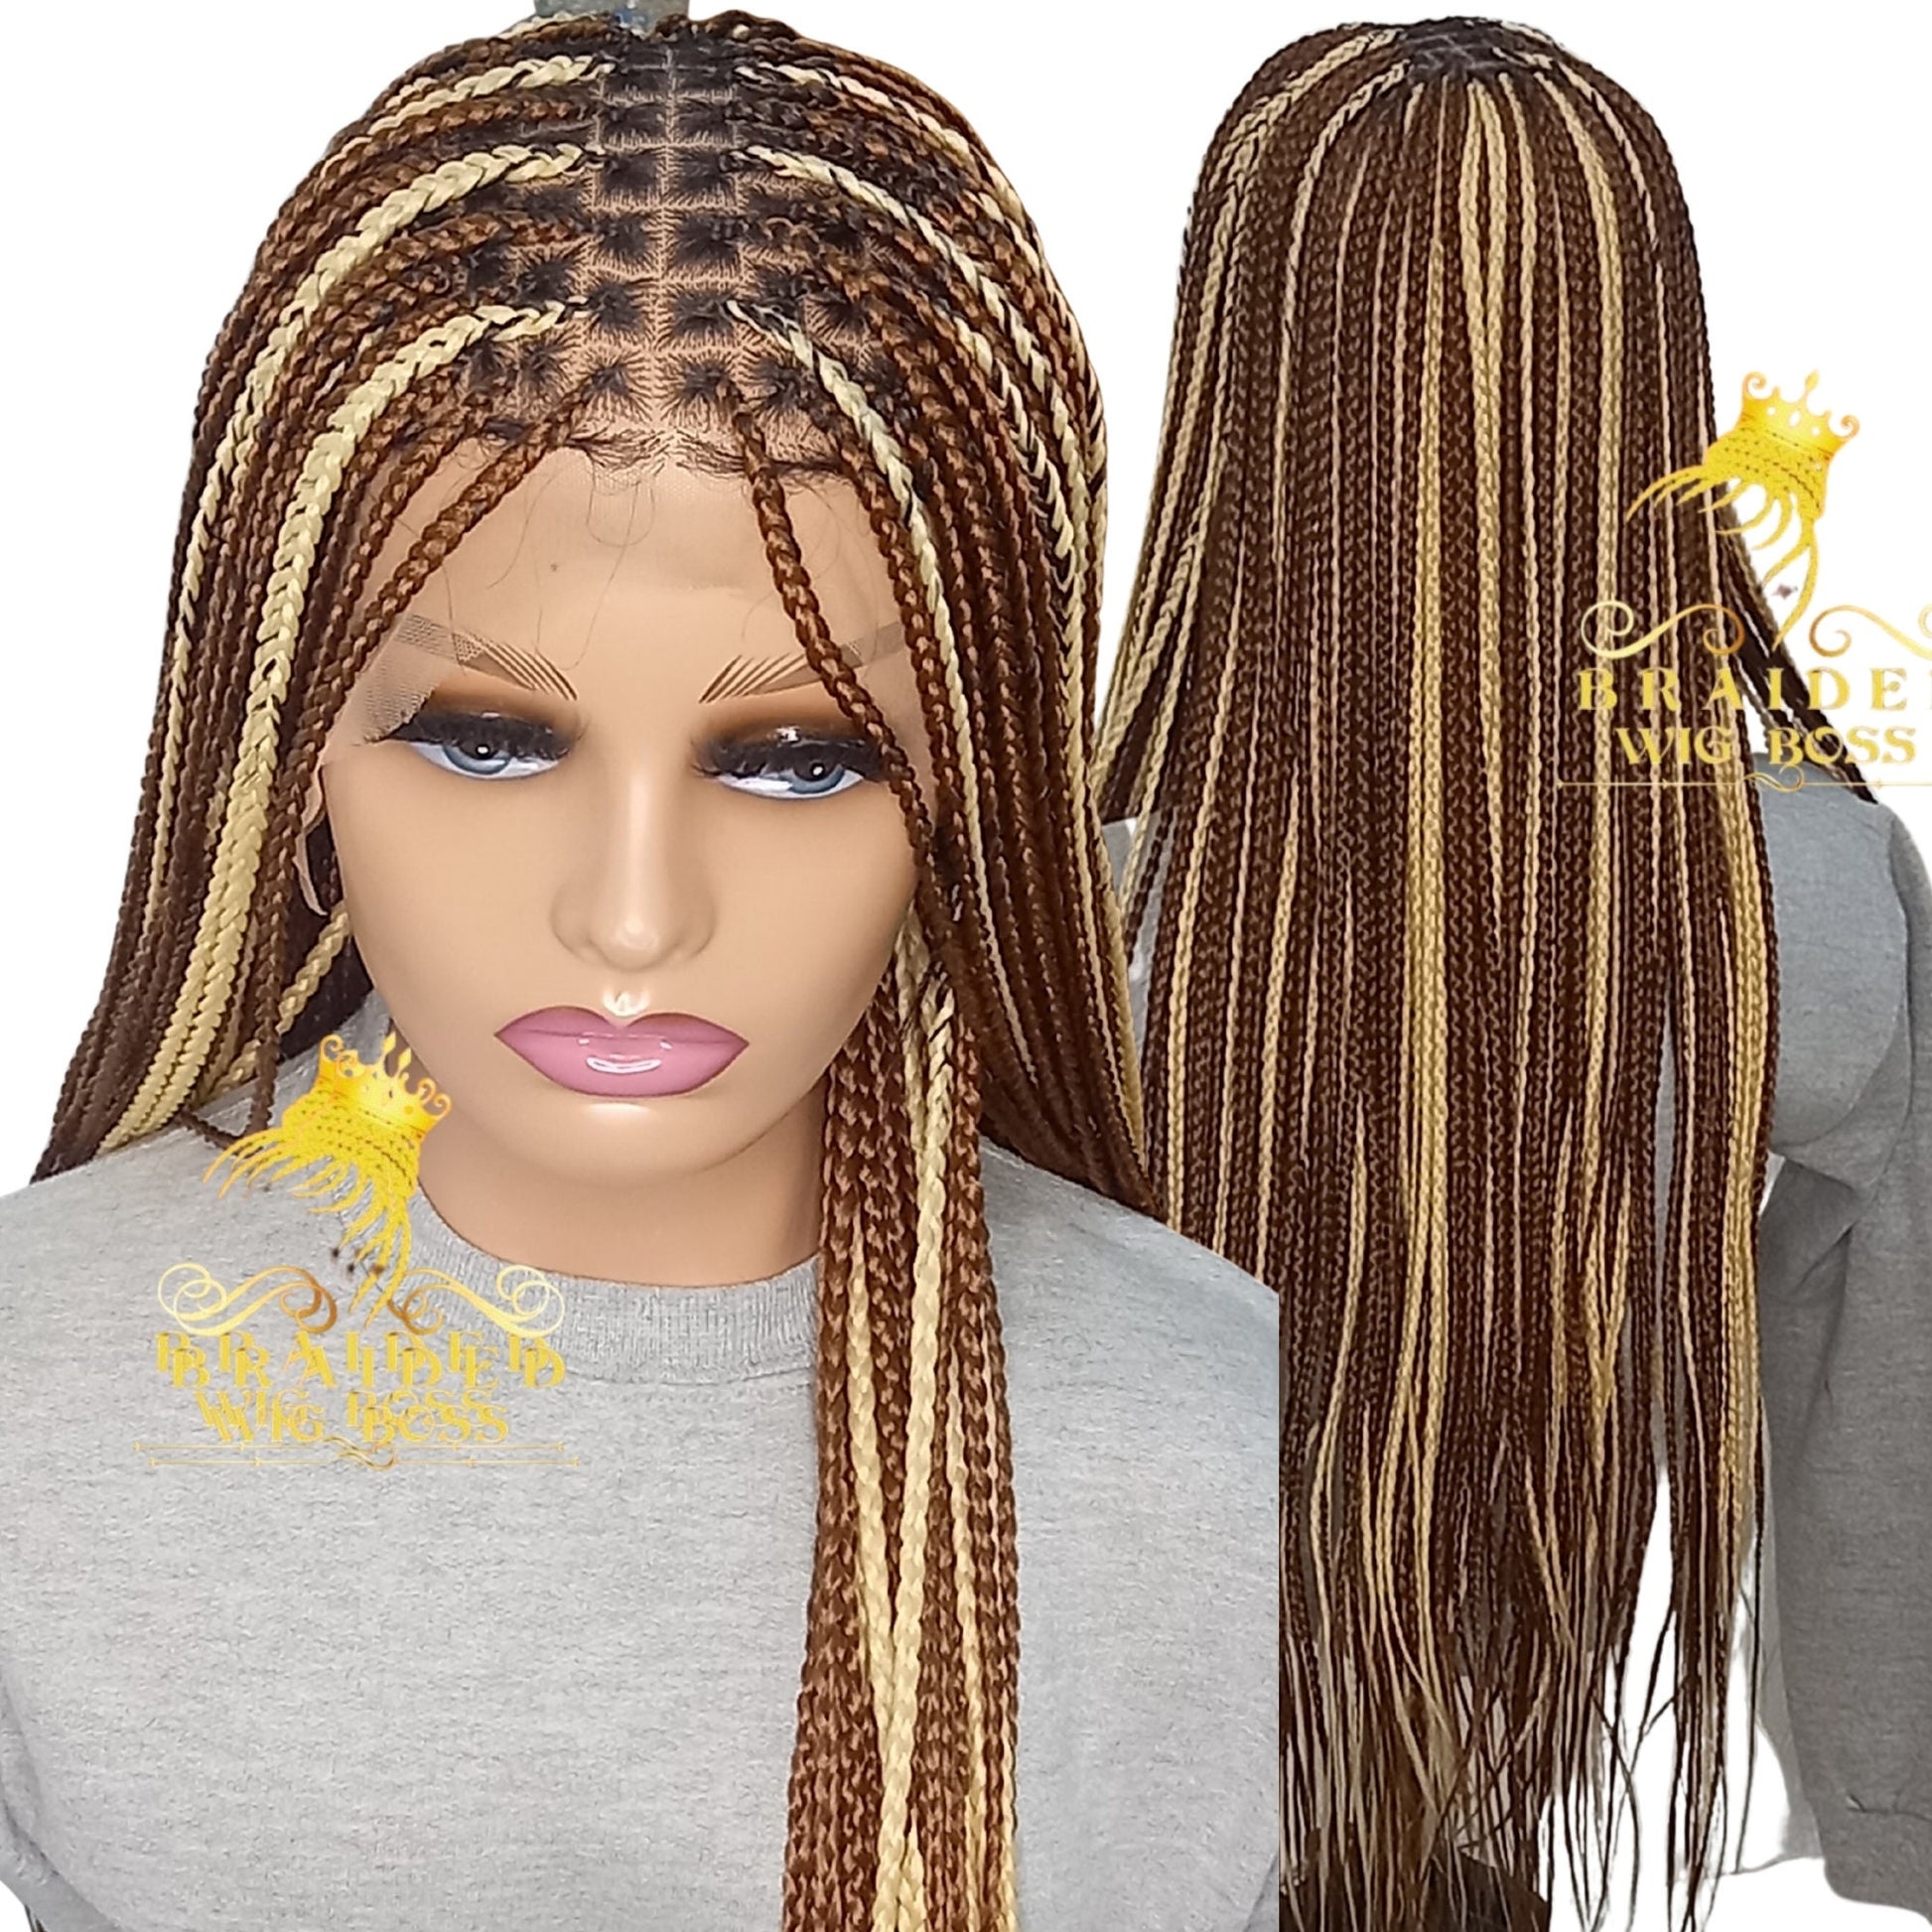 Braided Wig Knotless Braid Wig Braided Wigs for Black Women Full Lace Wigs  Braided Lace Front Wig Box Braid Wig Box Braided Wig Cornrow Wig 